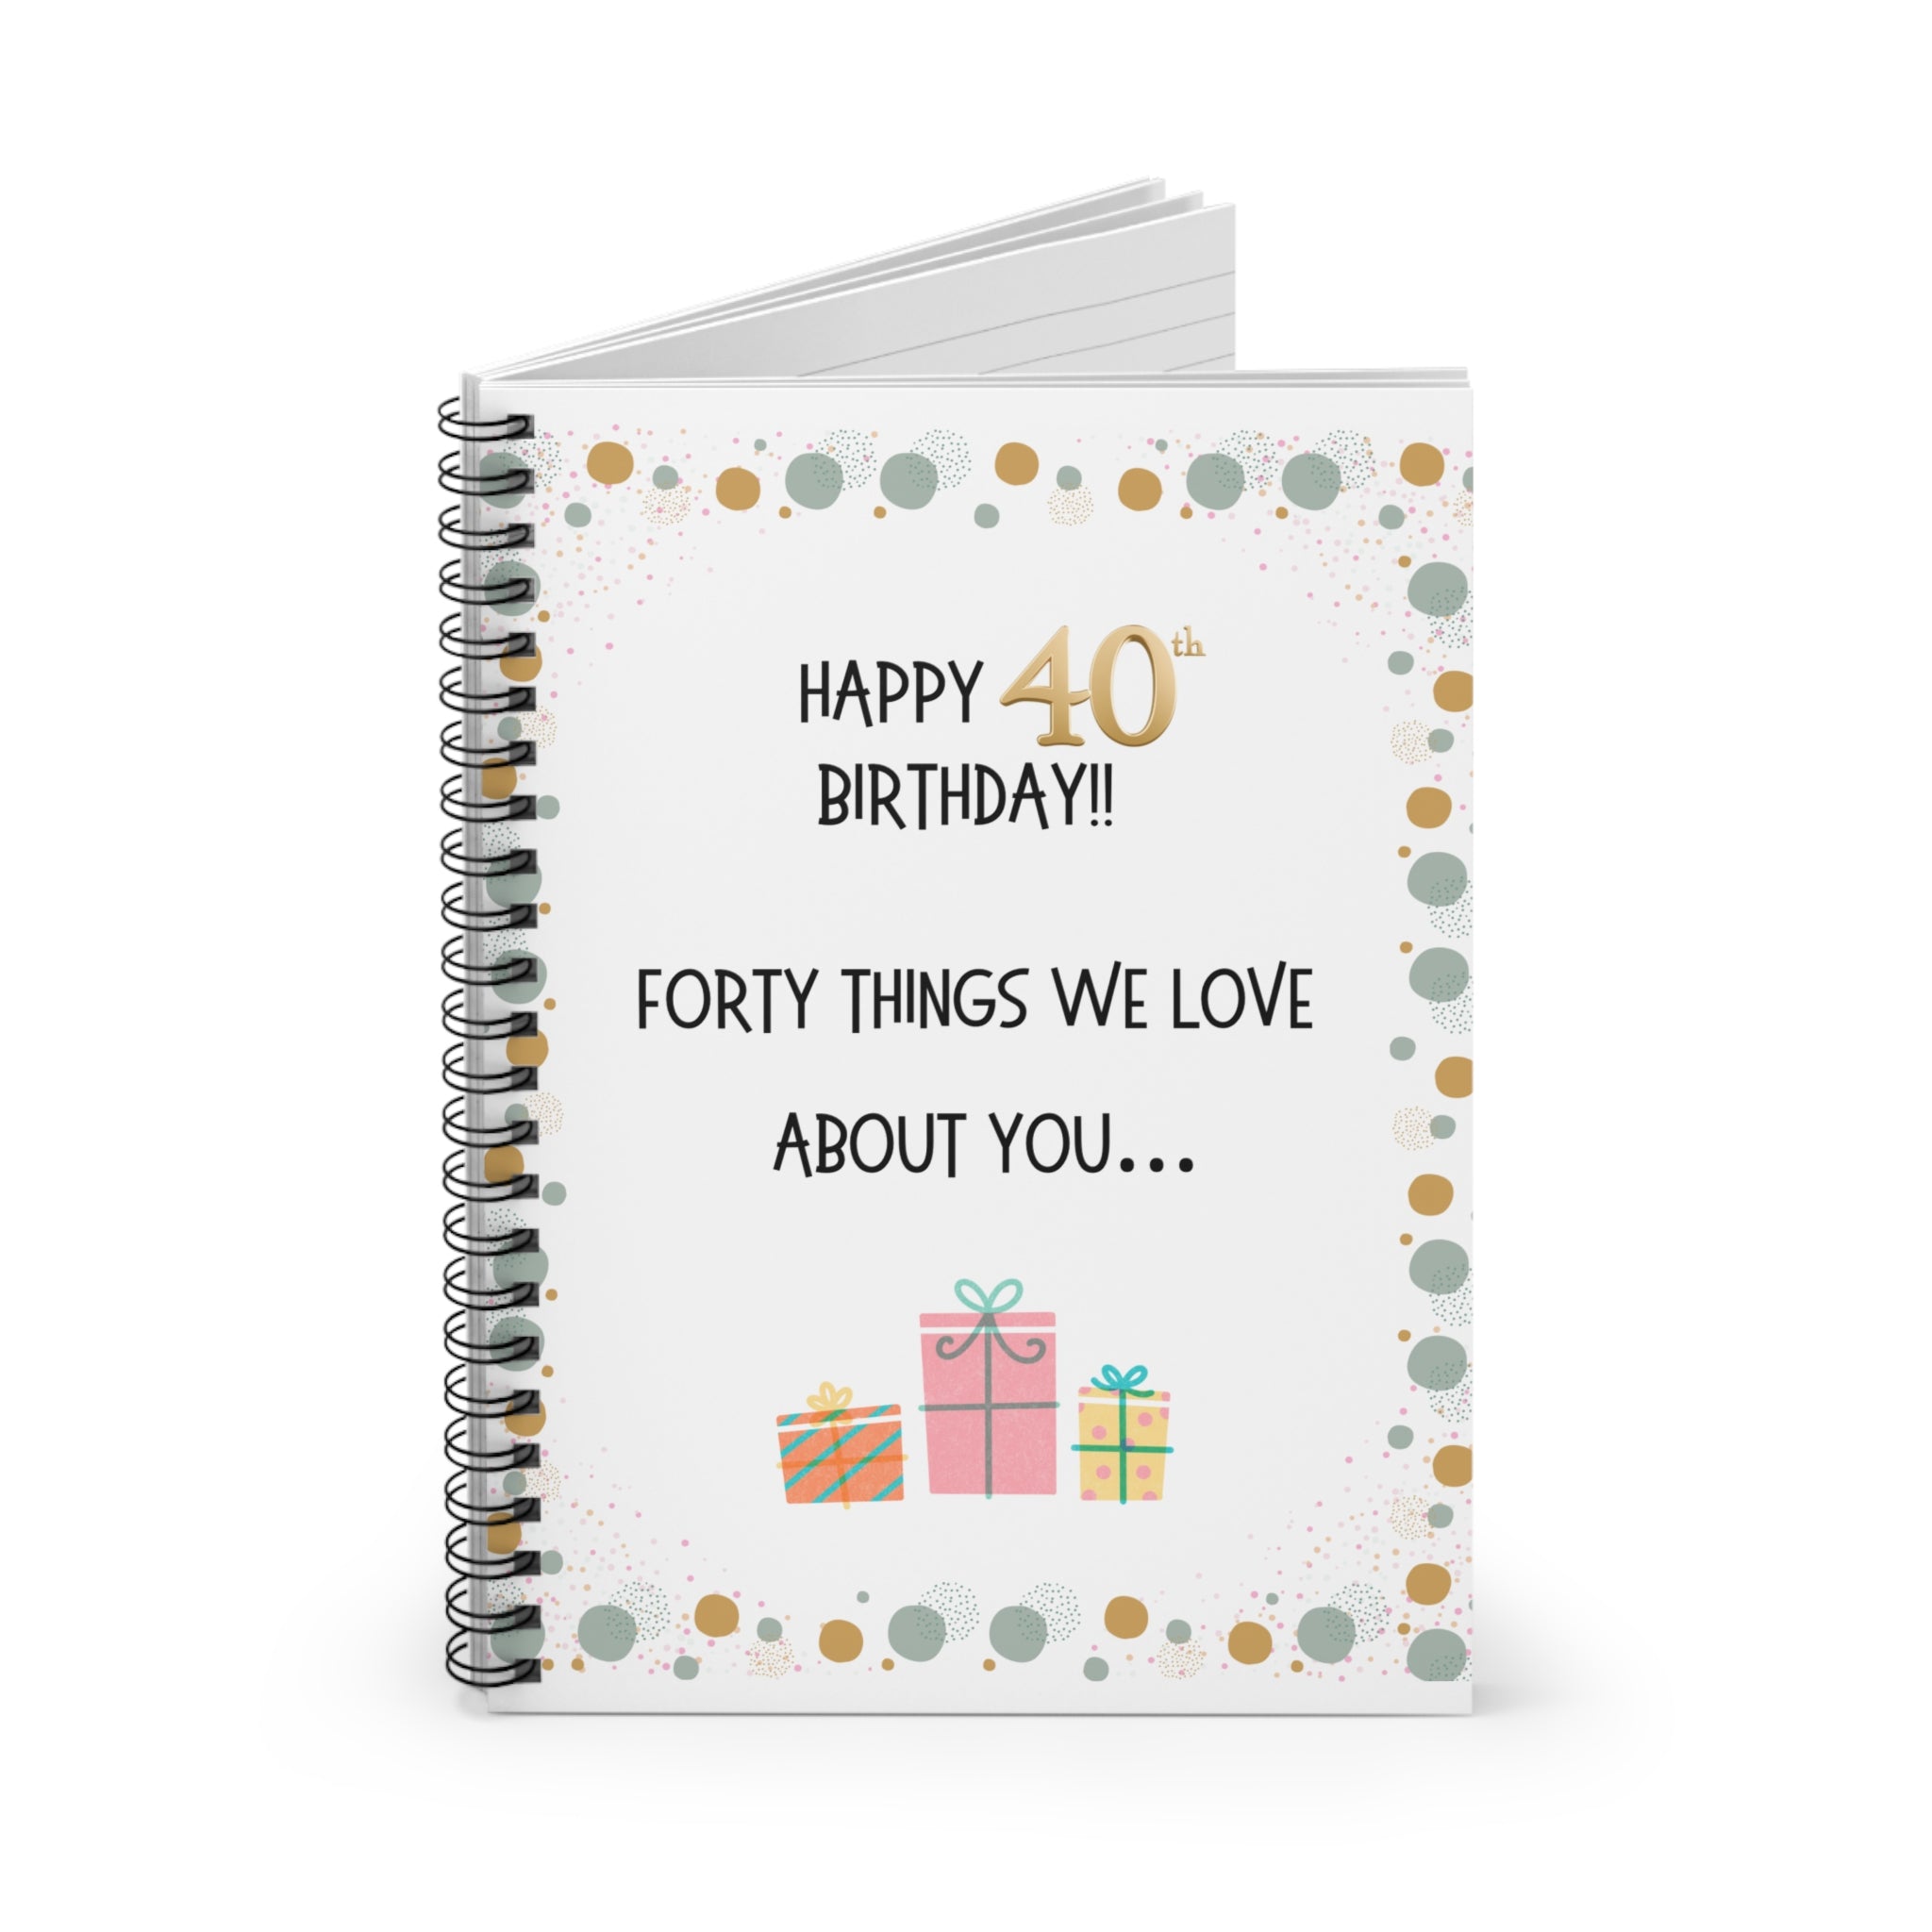 We Love You Birthday Gift Idea For Her- Personalization Option